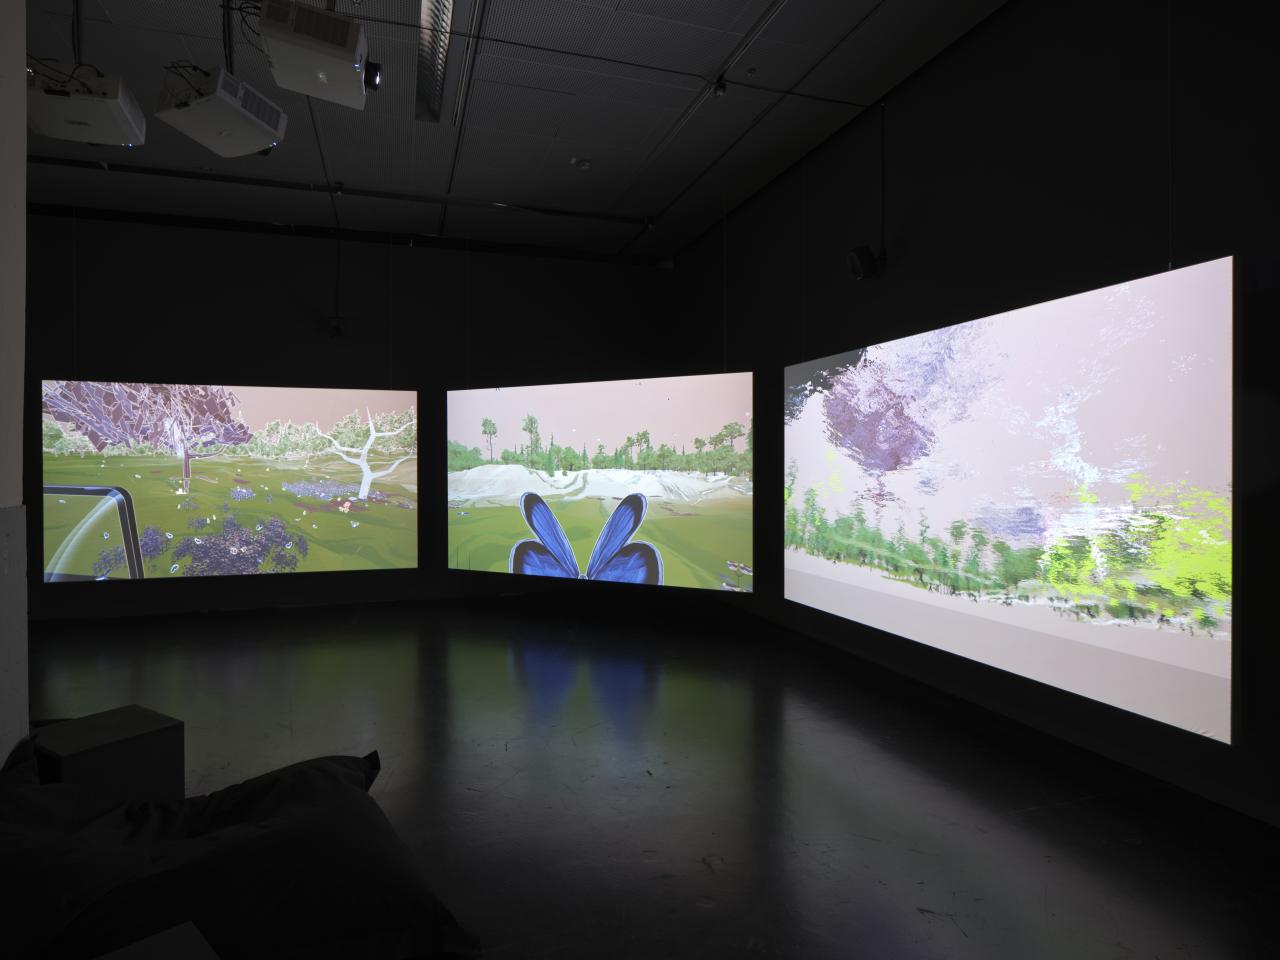 The picture shows a dark room with three large screens in the middle. The screens show a Ki-generated beautiful landscape with lots of green and a butterfly.